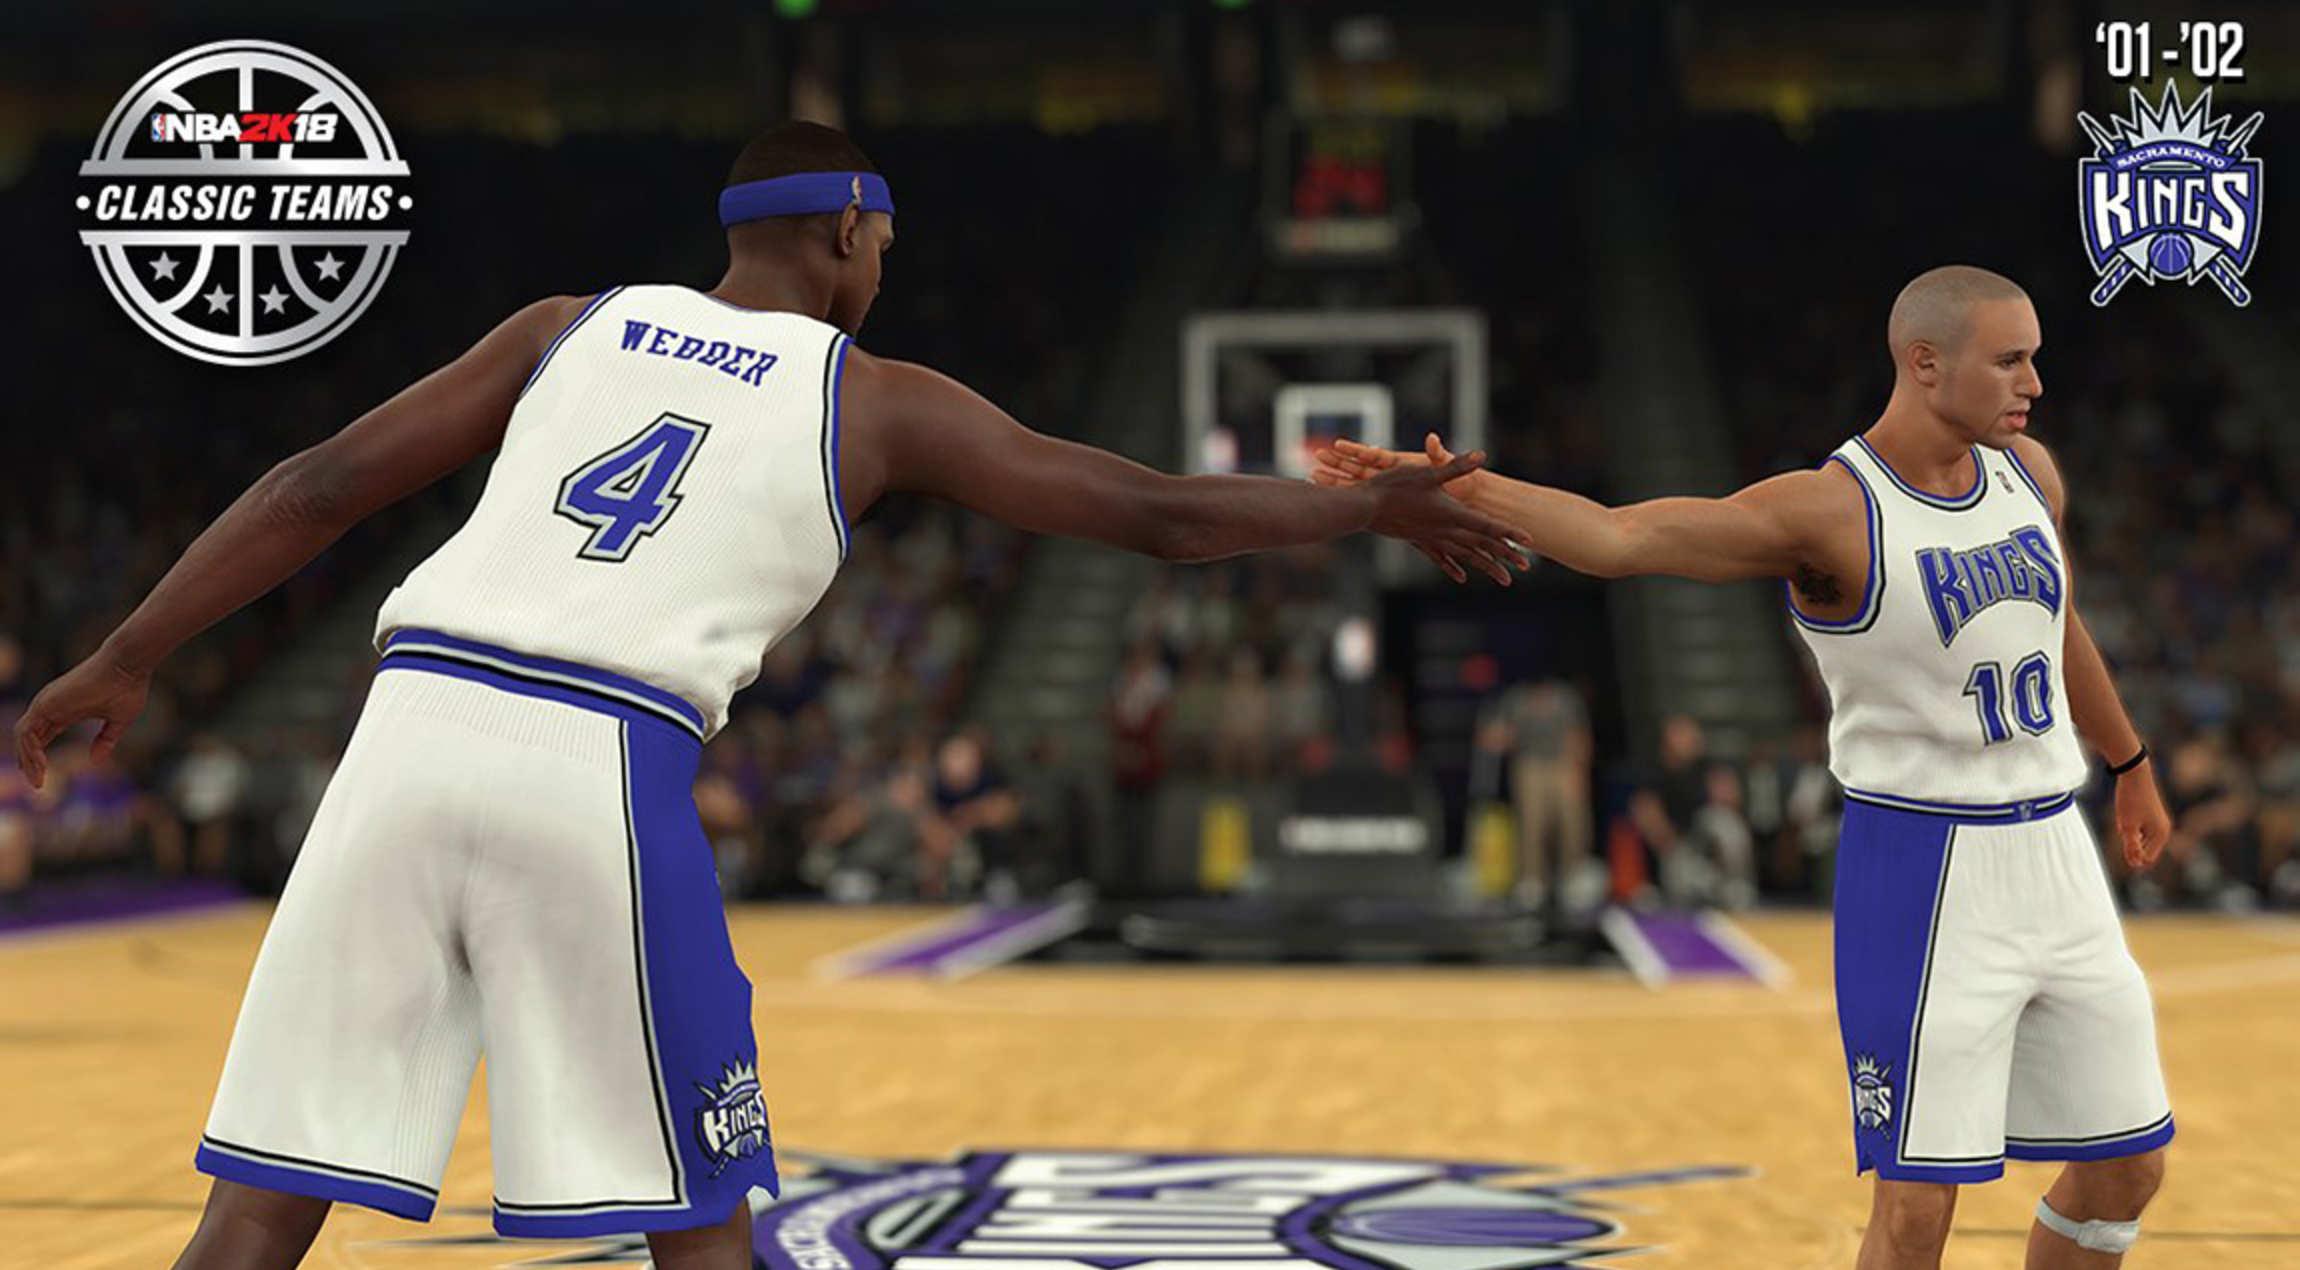 2001 02 Kings Featured As Classic Team In NBA 2K18